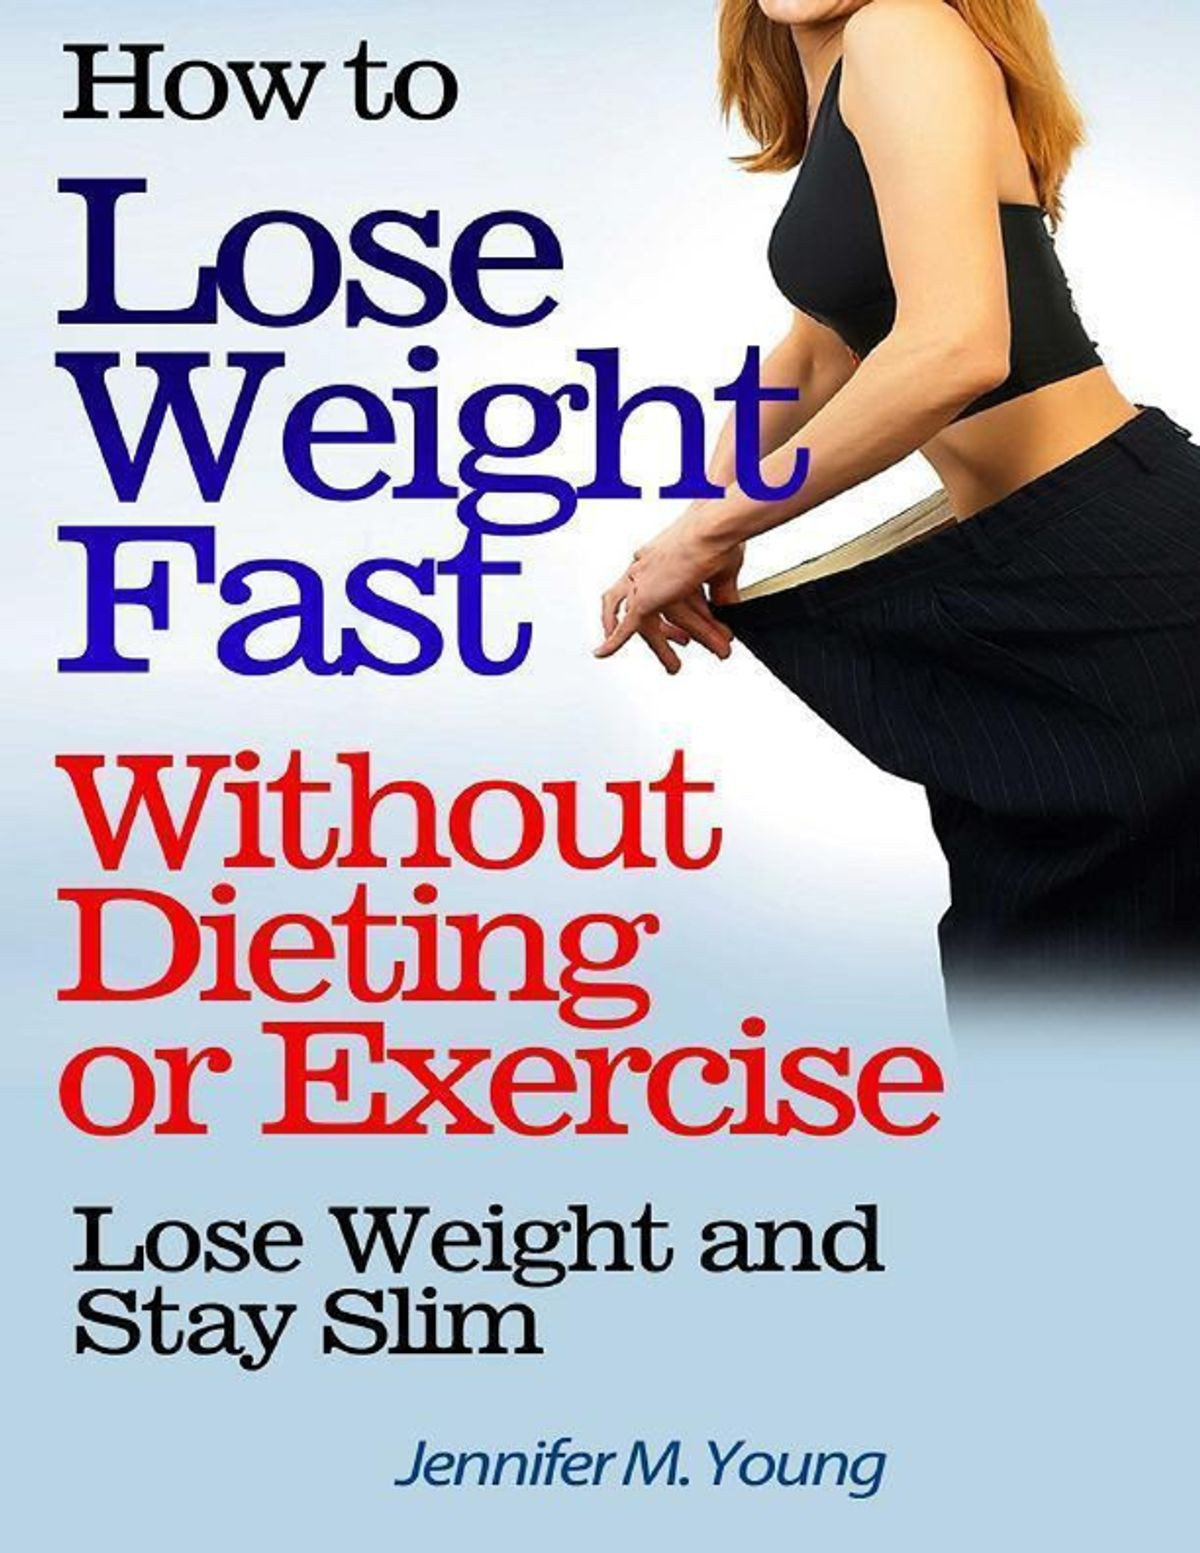 How To Lose Weight Quickly Workout
 How to Lose Weight Fast Without Dieting or Exercise Lose